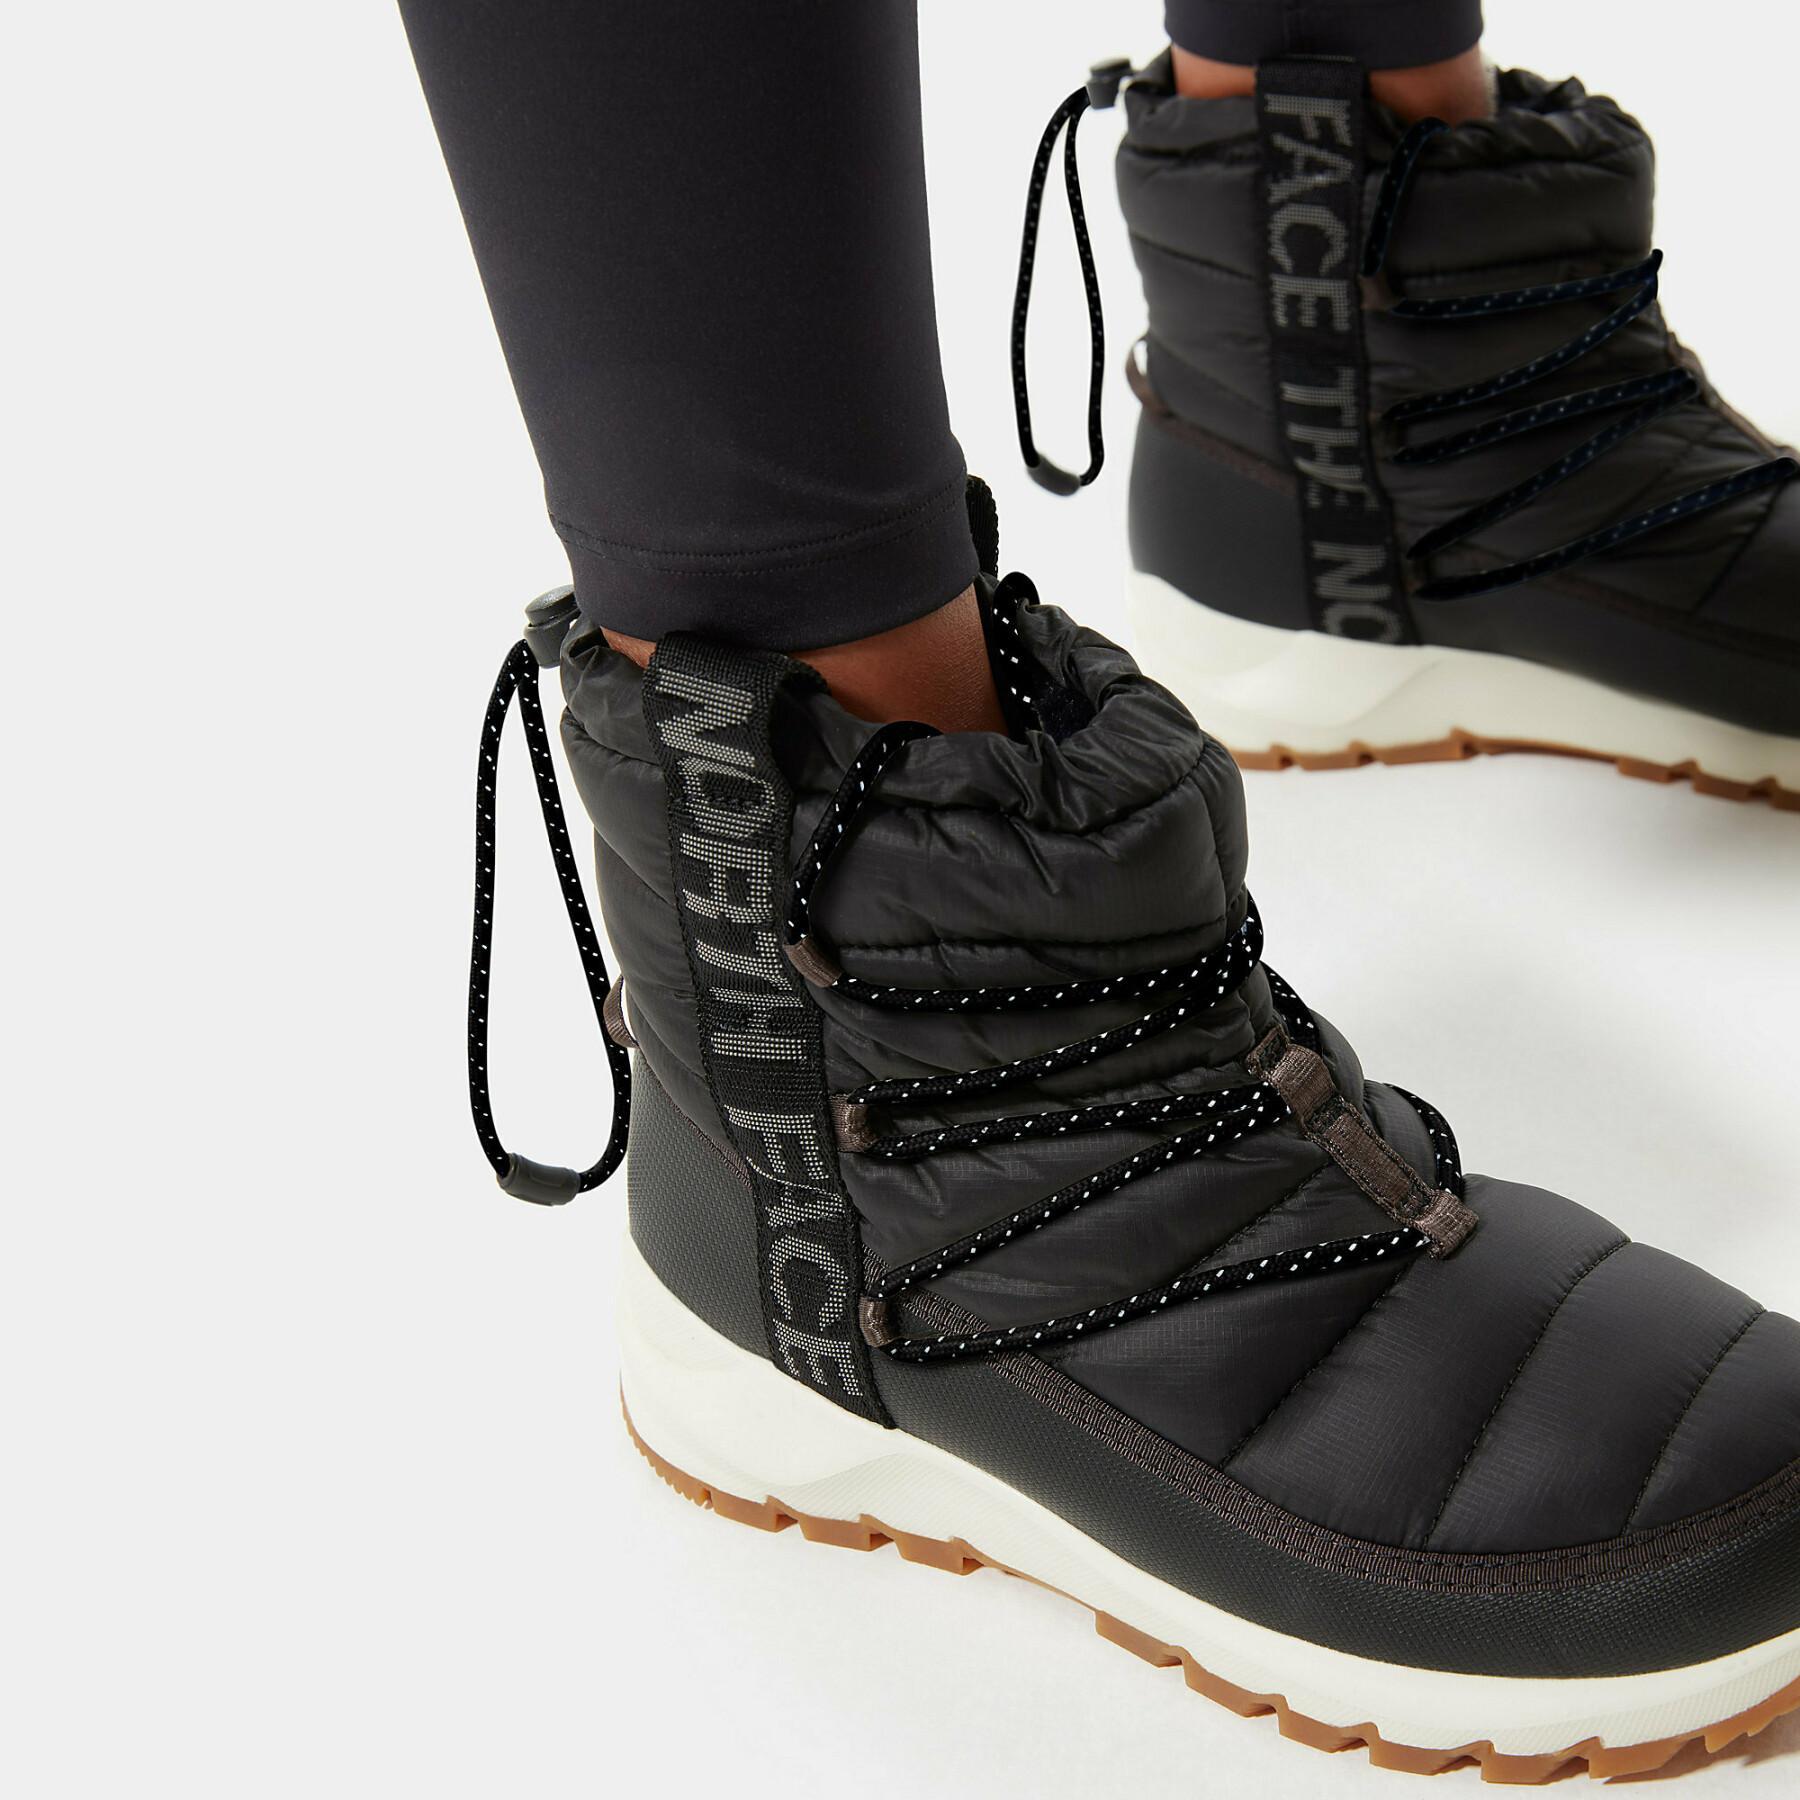 Botas de mujer The North Face Thermoball